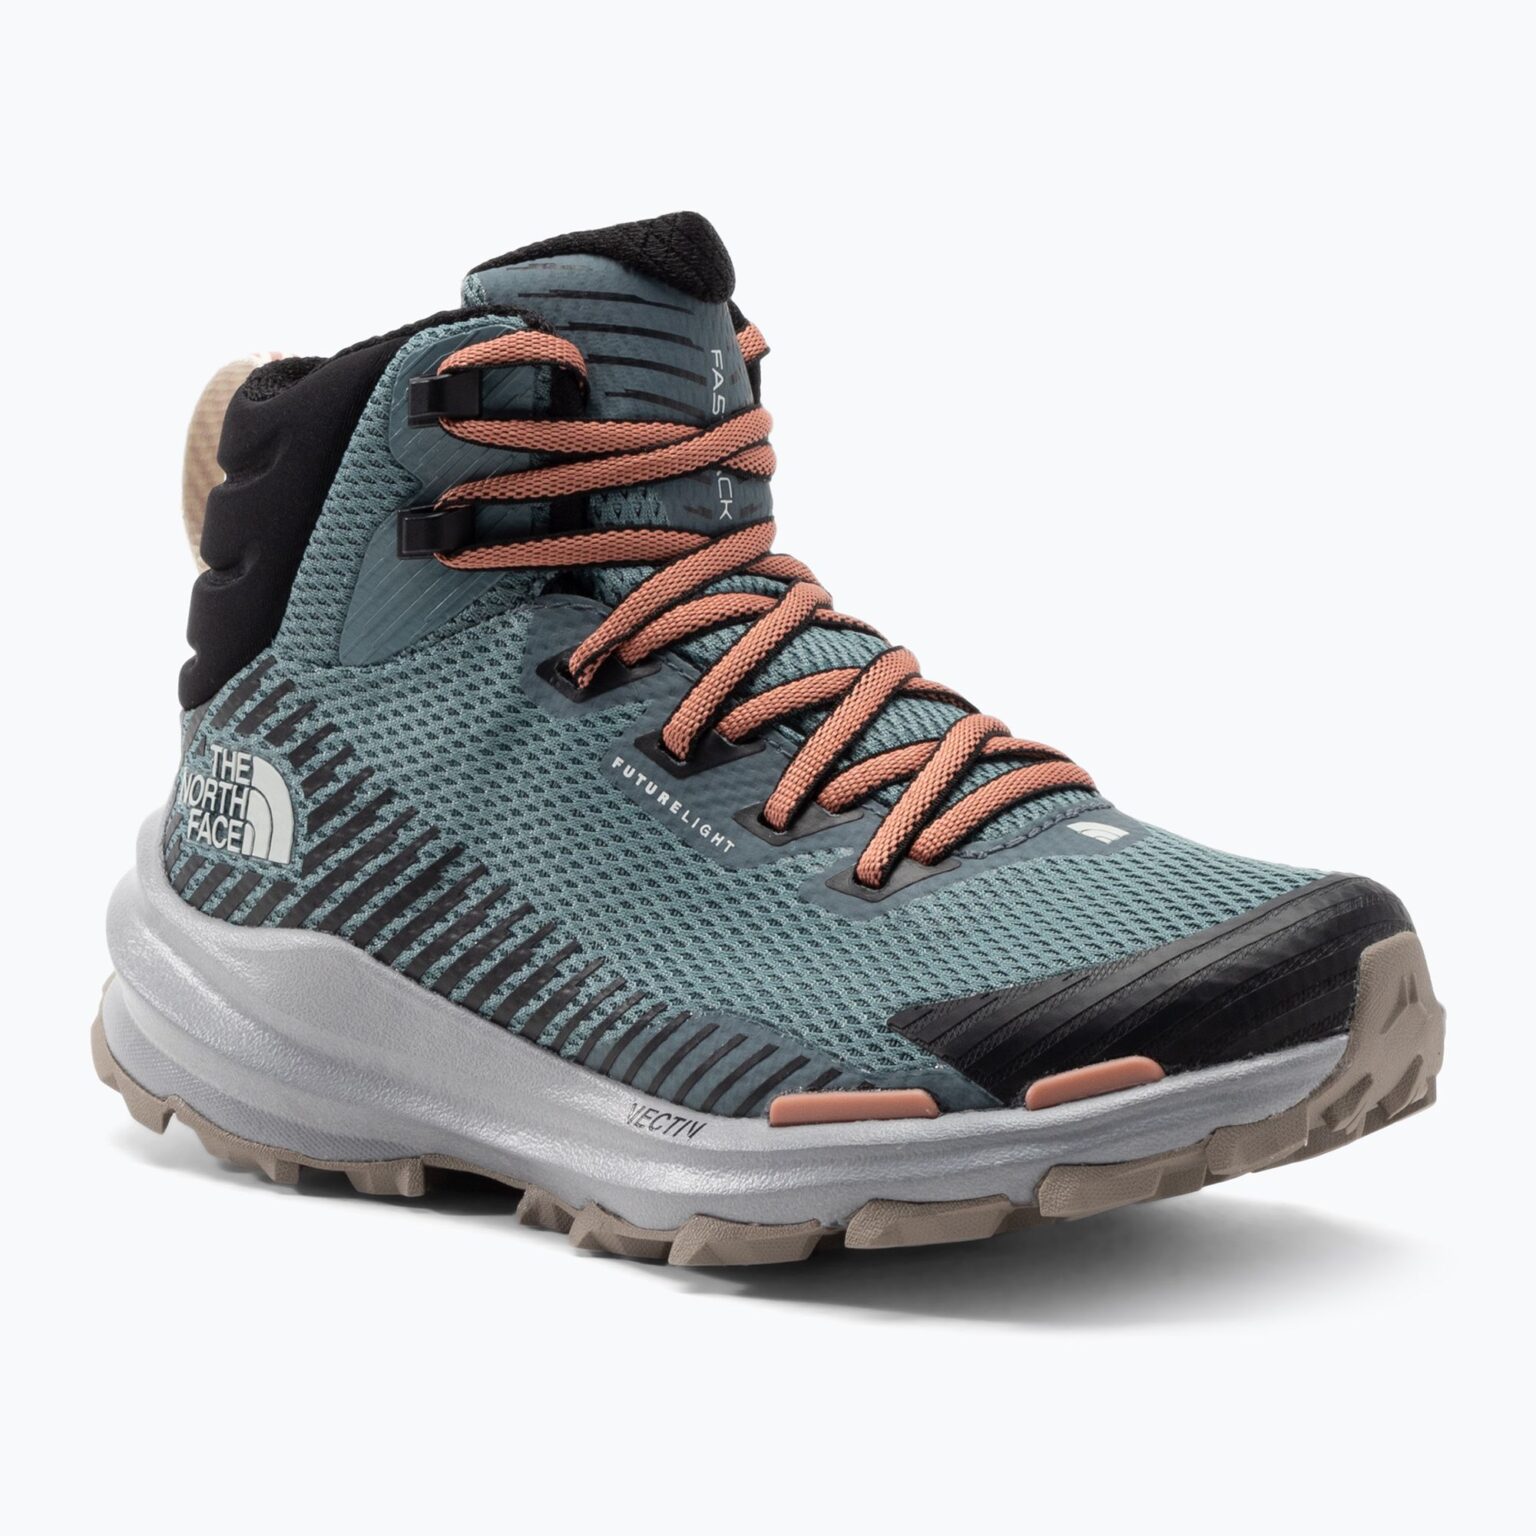 Buty turystyczne damskie The North Face Vectiv Fastpack Mid Futurelight niebieskie NF0A5JCX4AB1